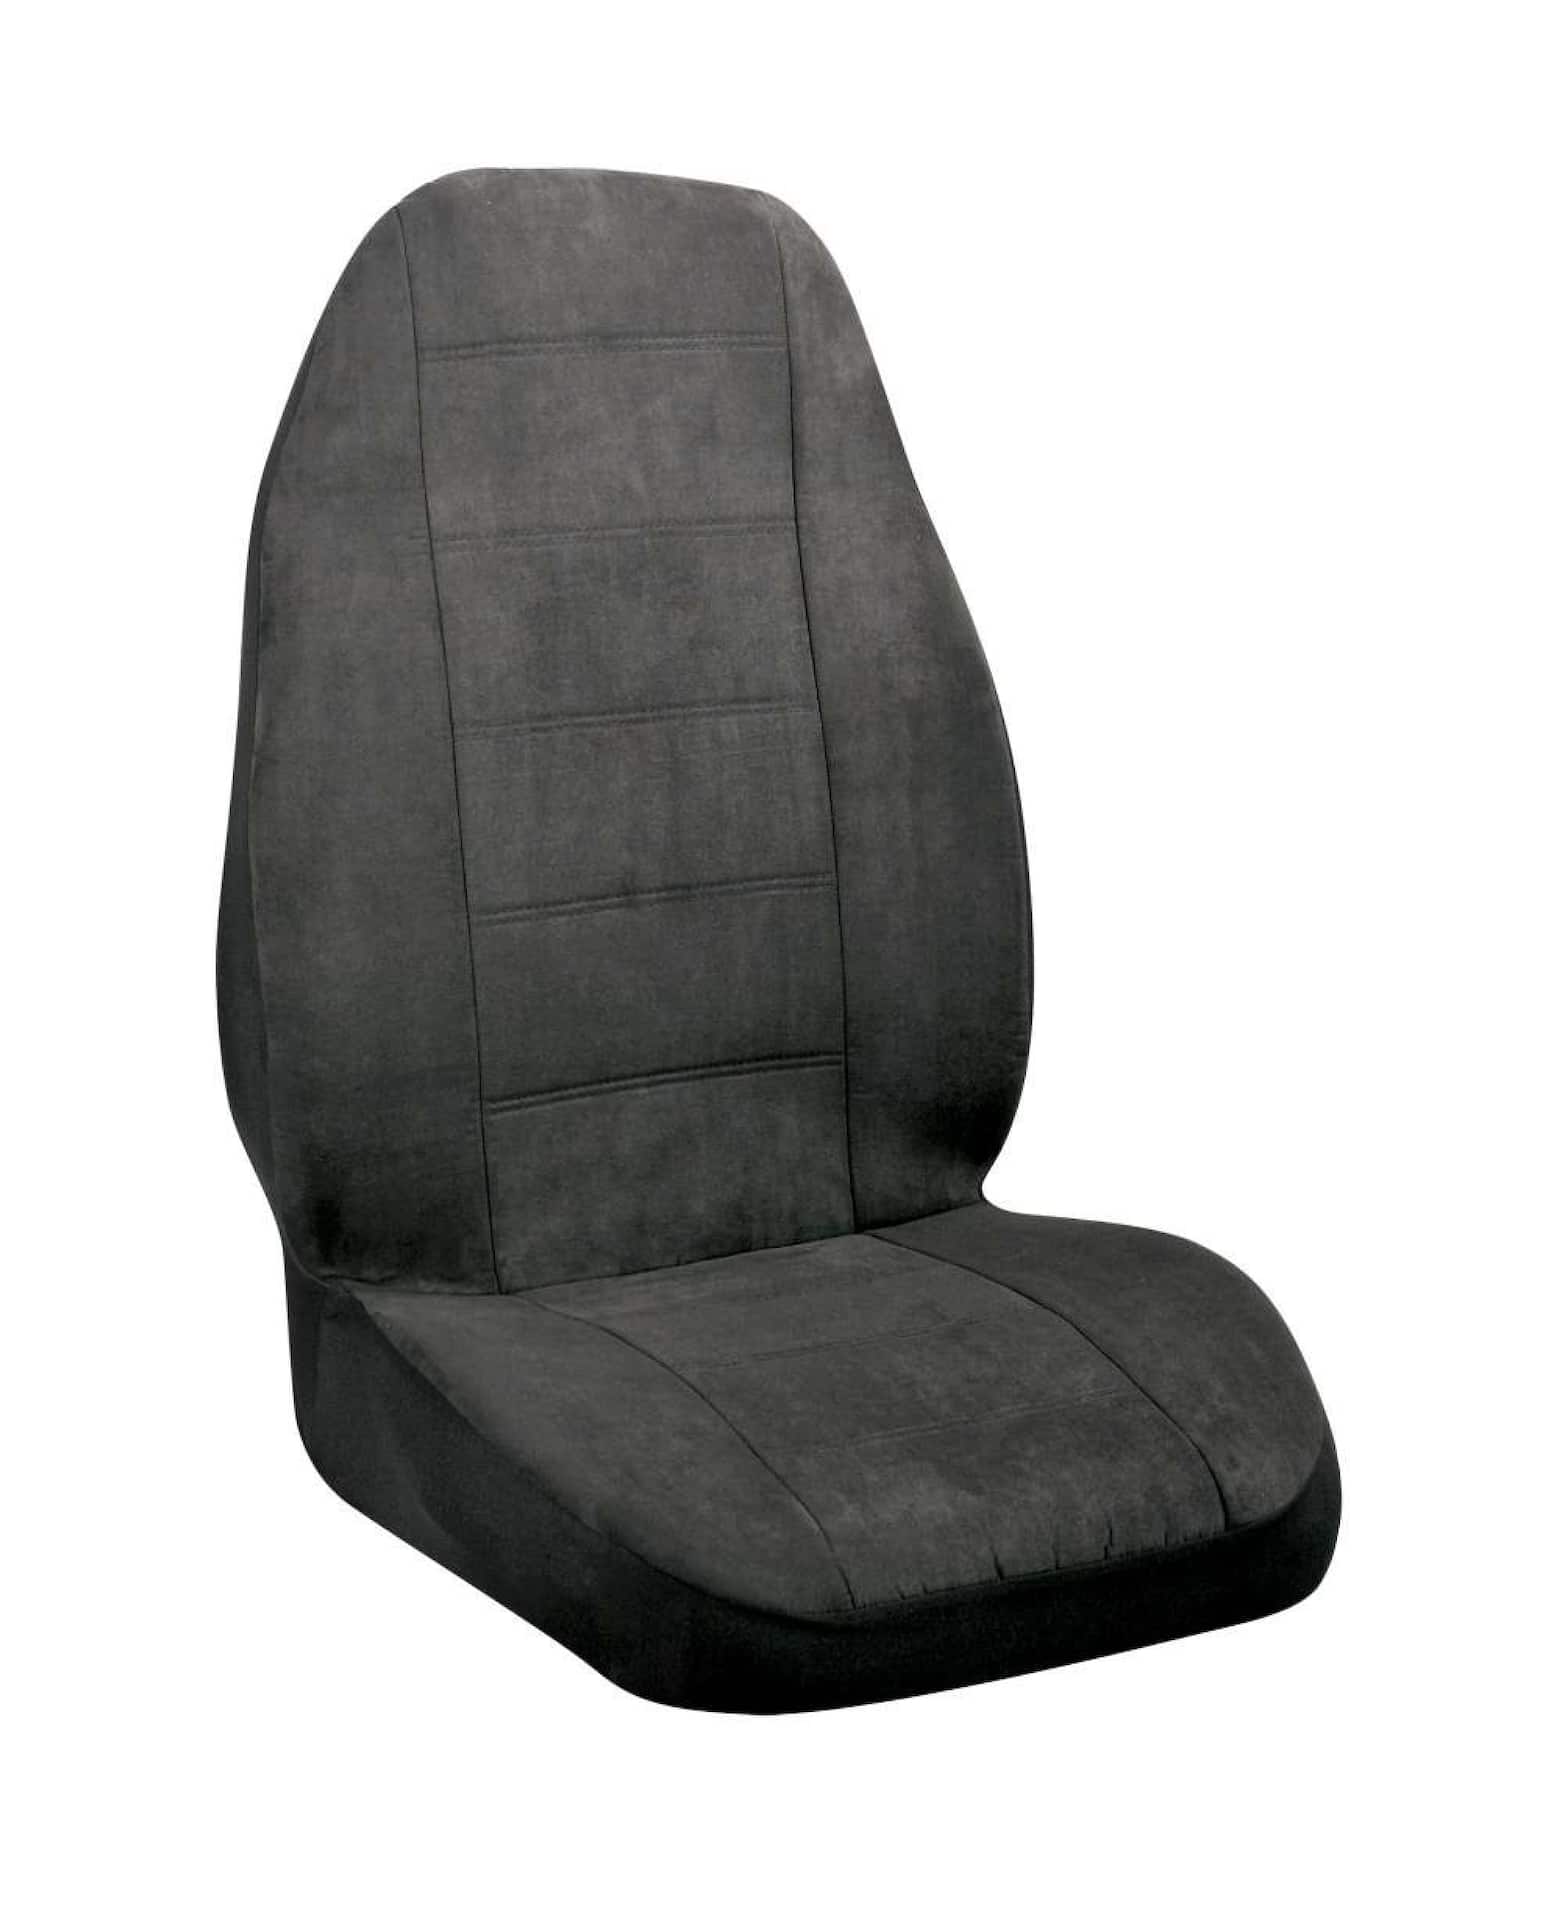 https://media-www.canadiantire.ca/product/automotive/car-care-accessories/auto-comfort/0323508/autotrends-heated-seat-cover-1380b29e-d063-4805-affb-67ab93688f4f-jpgrendition.jpg